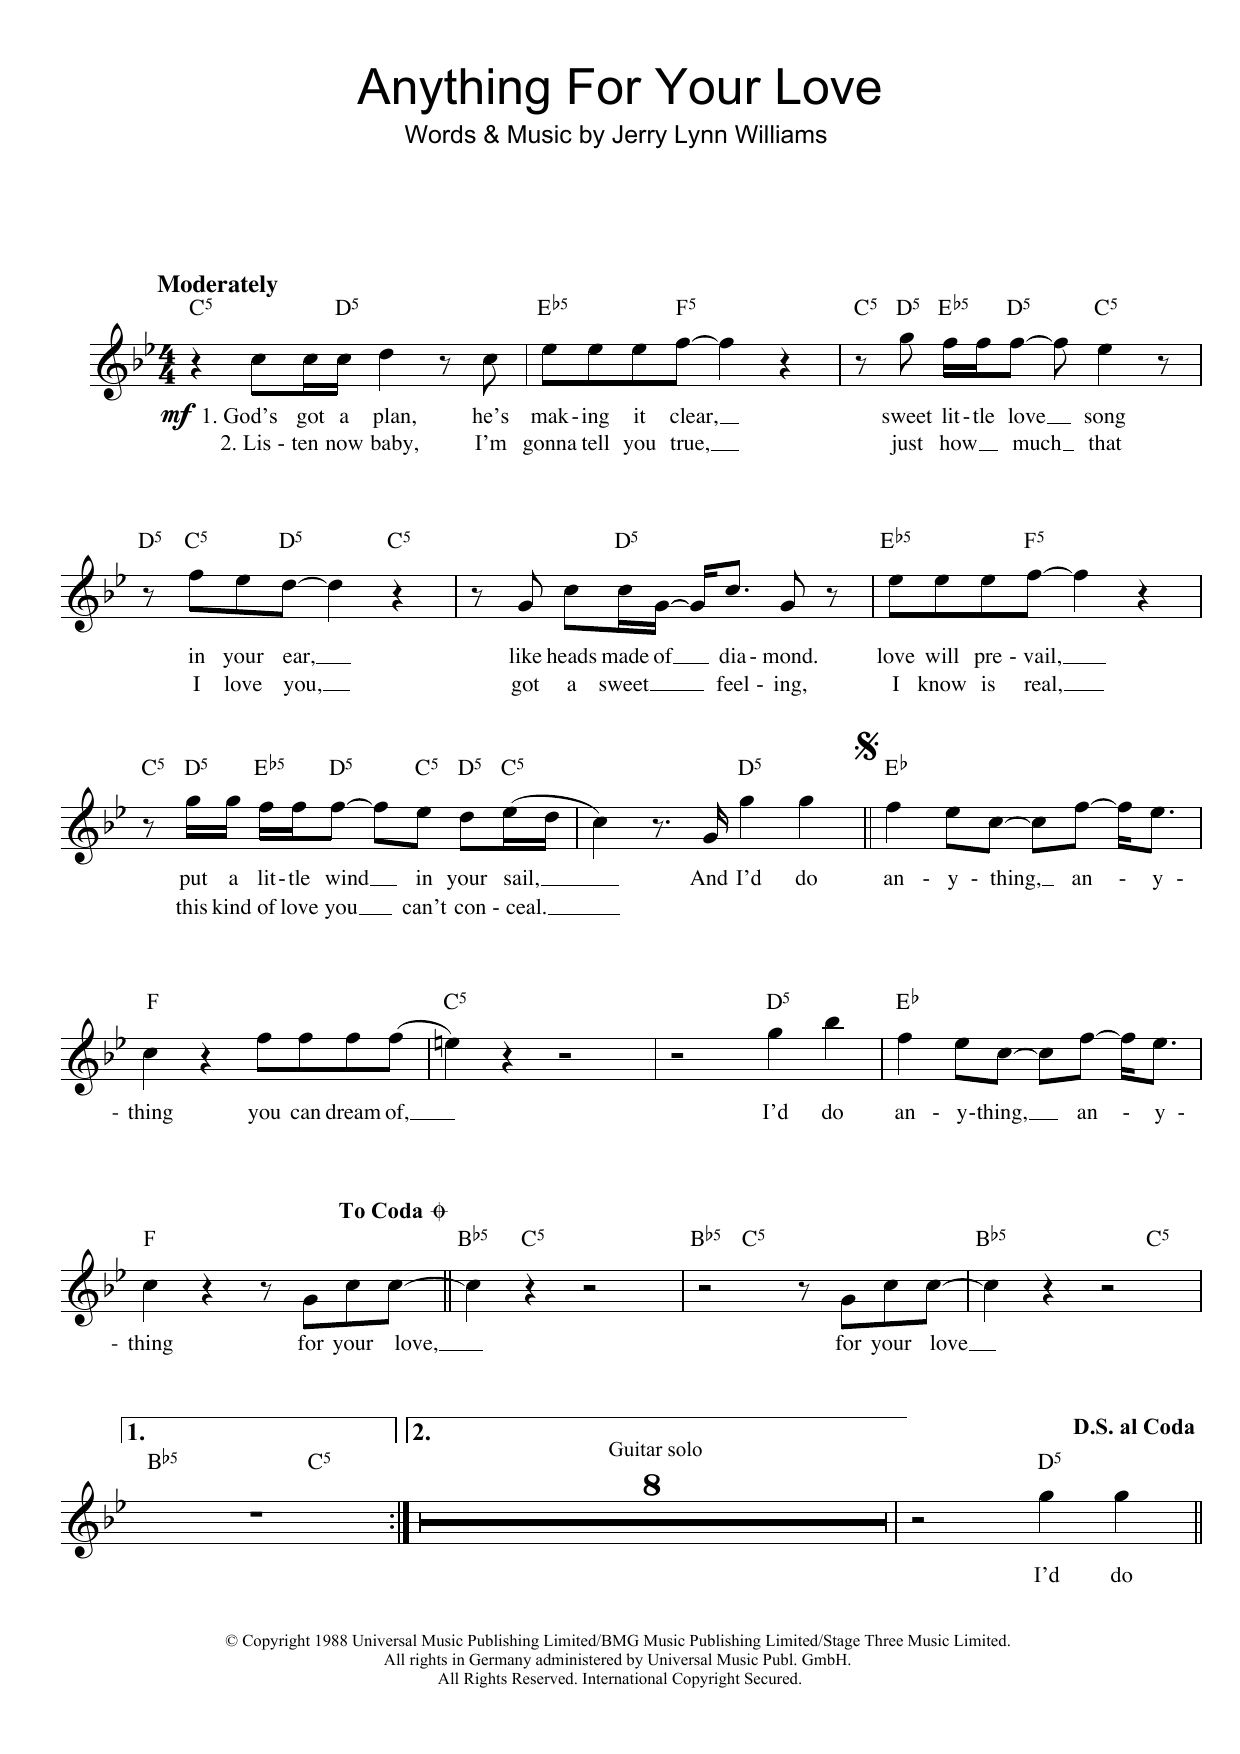 Jerry Lynn Williams Anything For Your Love sheet music notes and chords. Download Printable PDF.